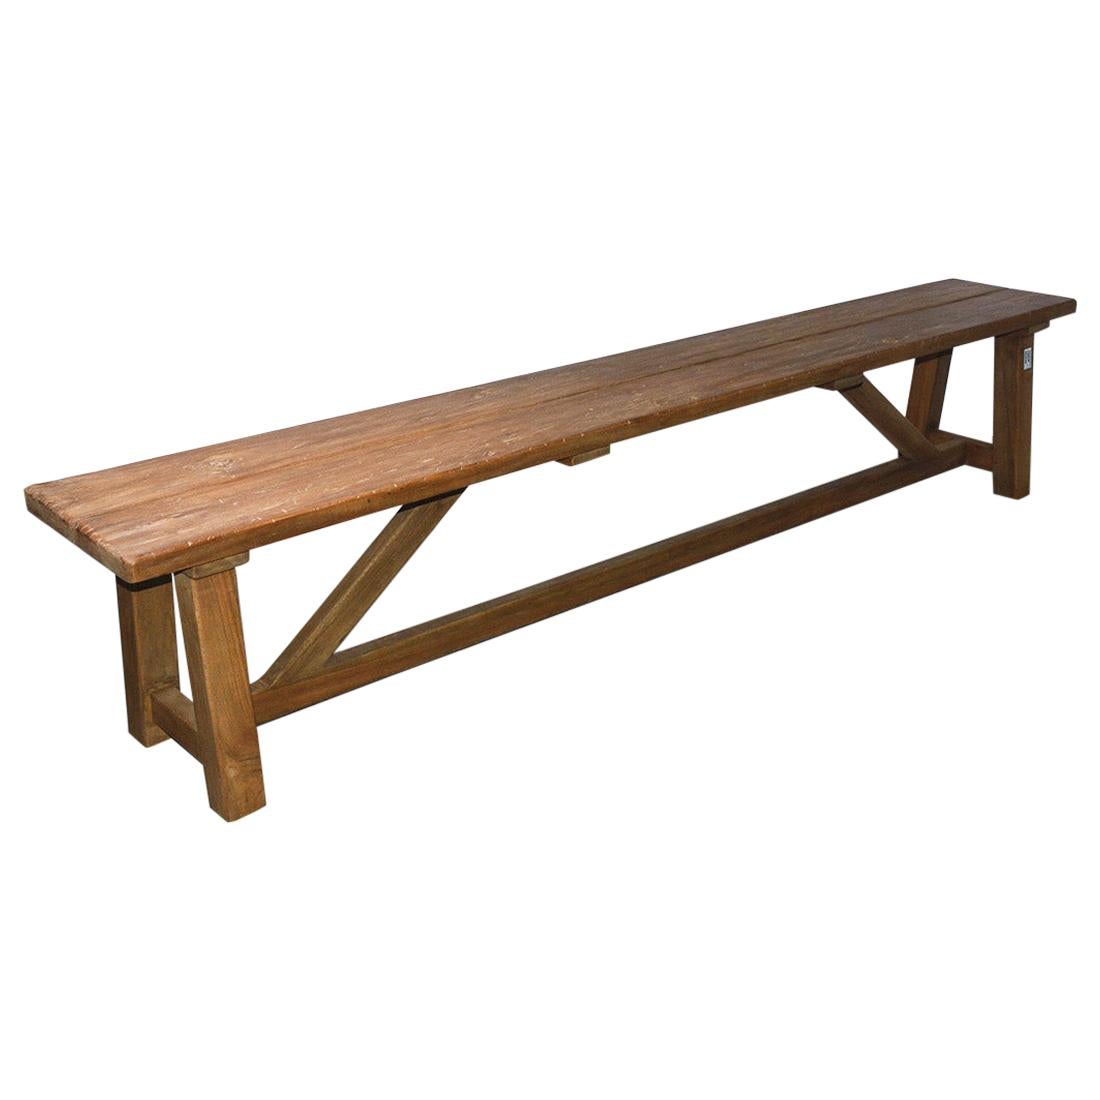 Rustic Asian Teak Wood Bench/Coffee Table -- Pair Available